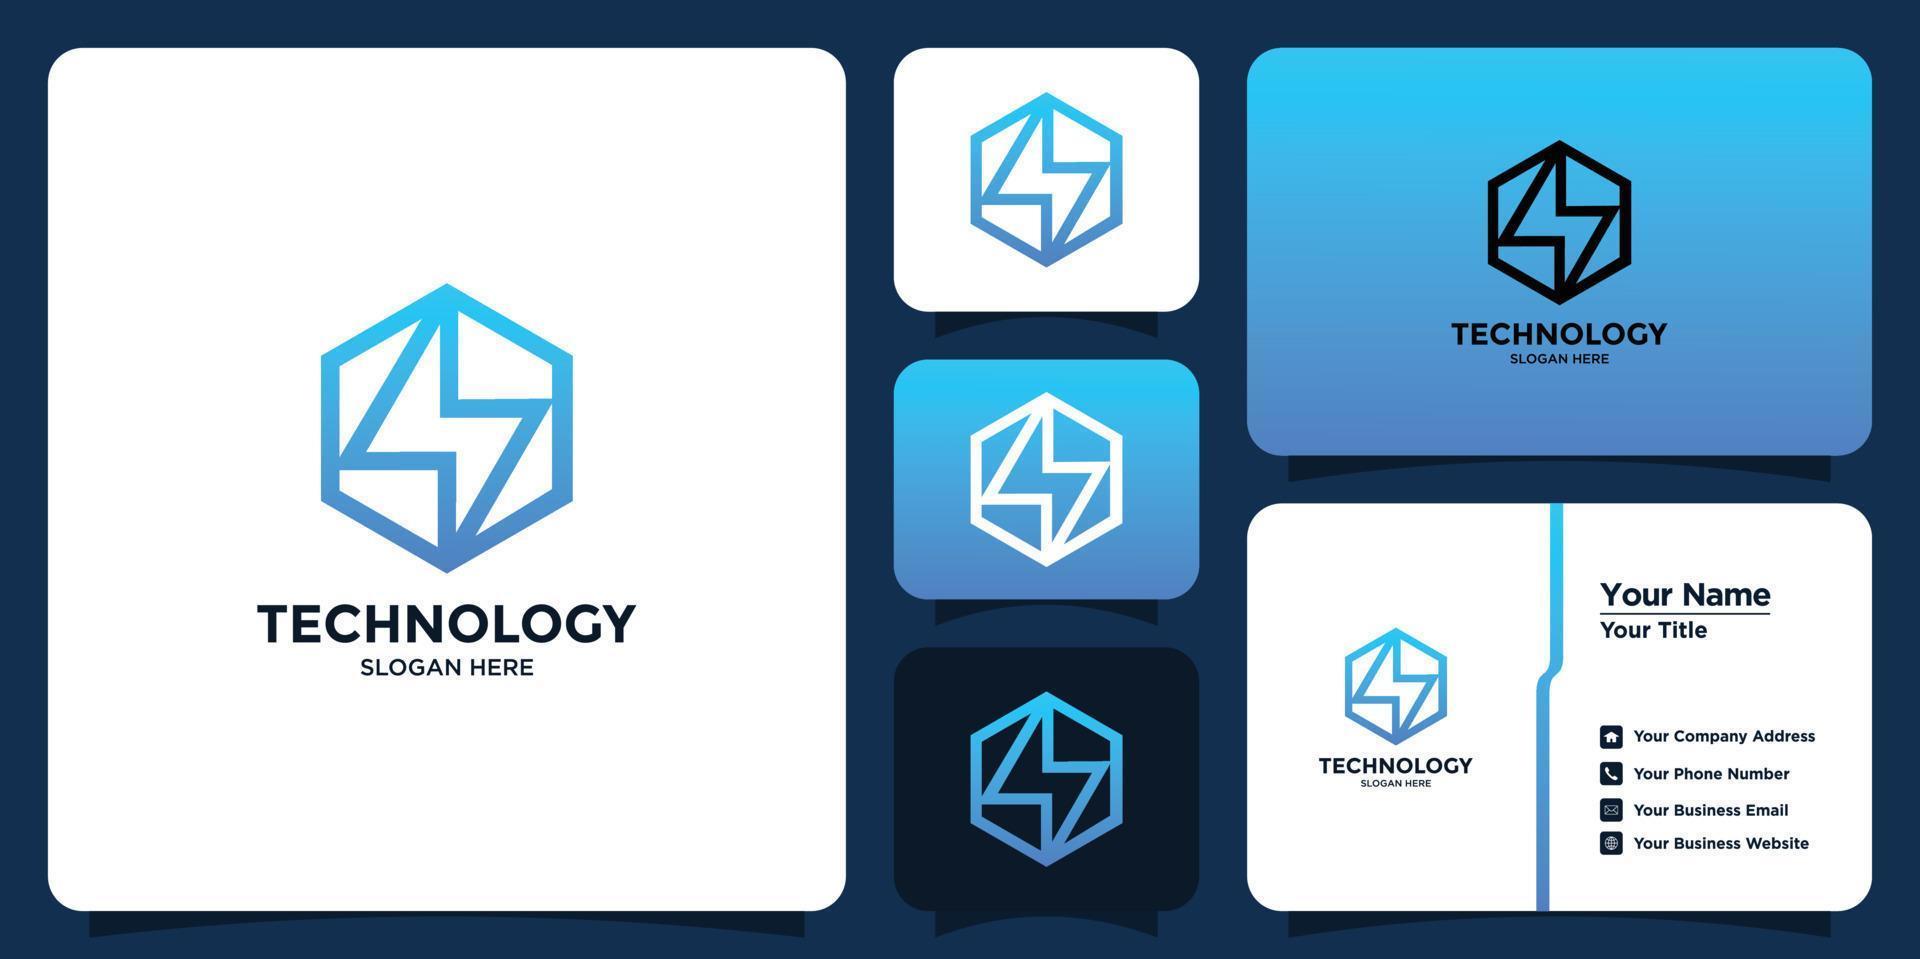 flash technology design logo and business card vector